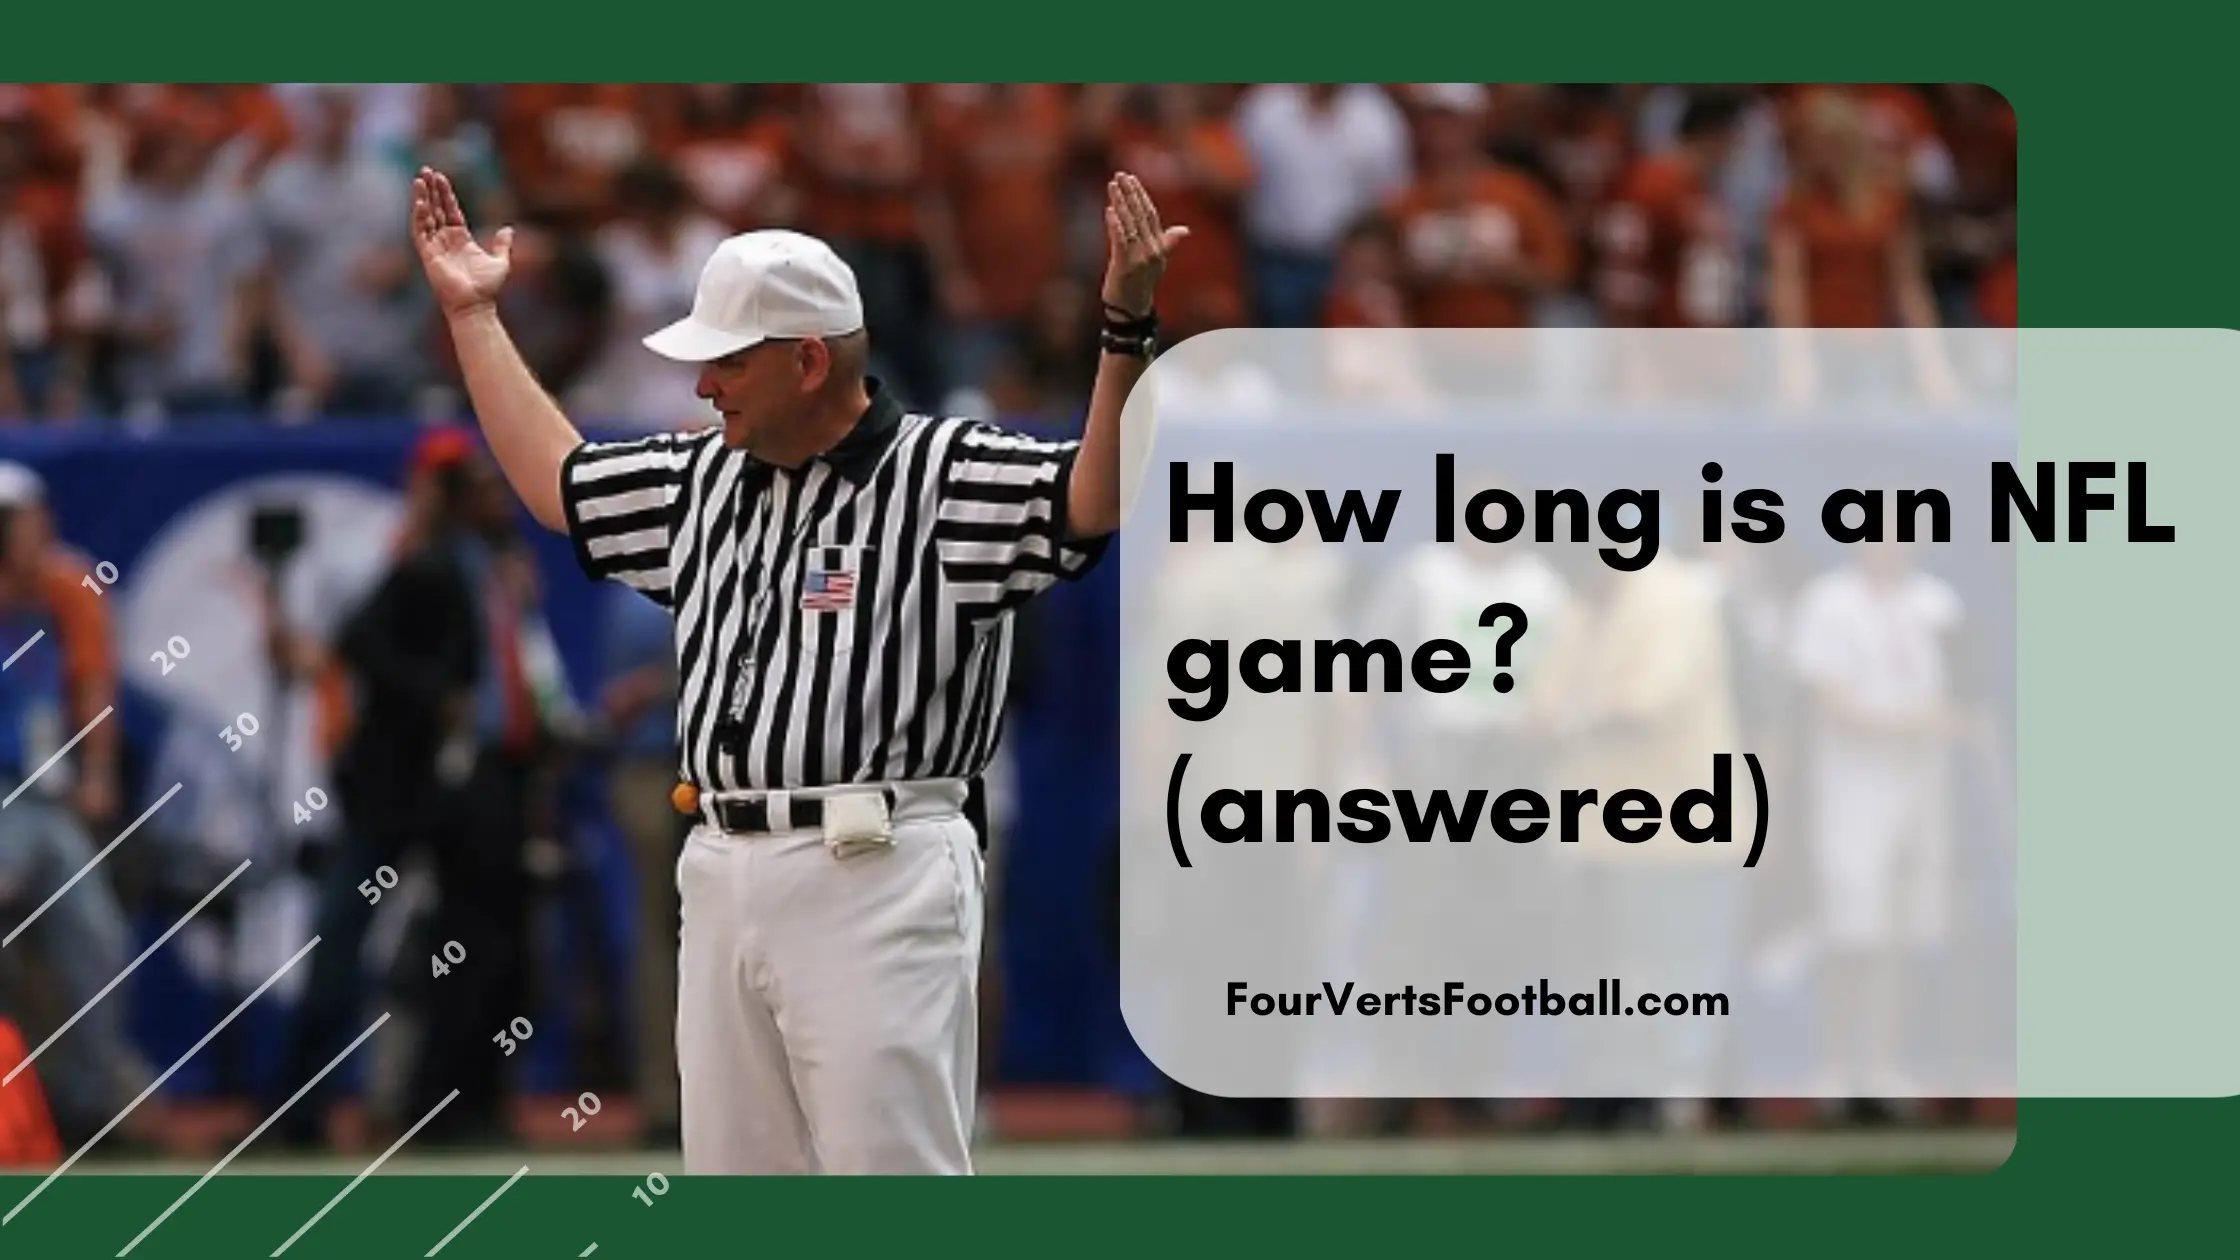 How long is an NFL game?